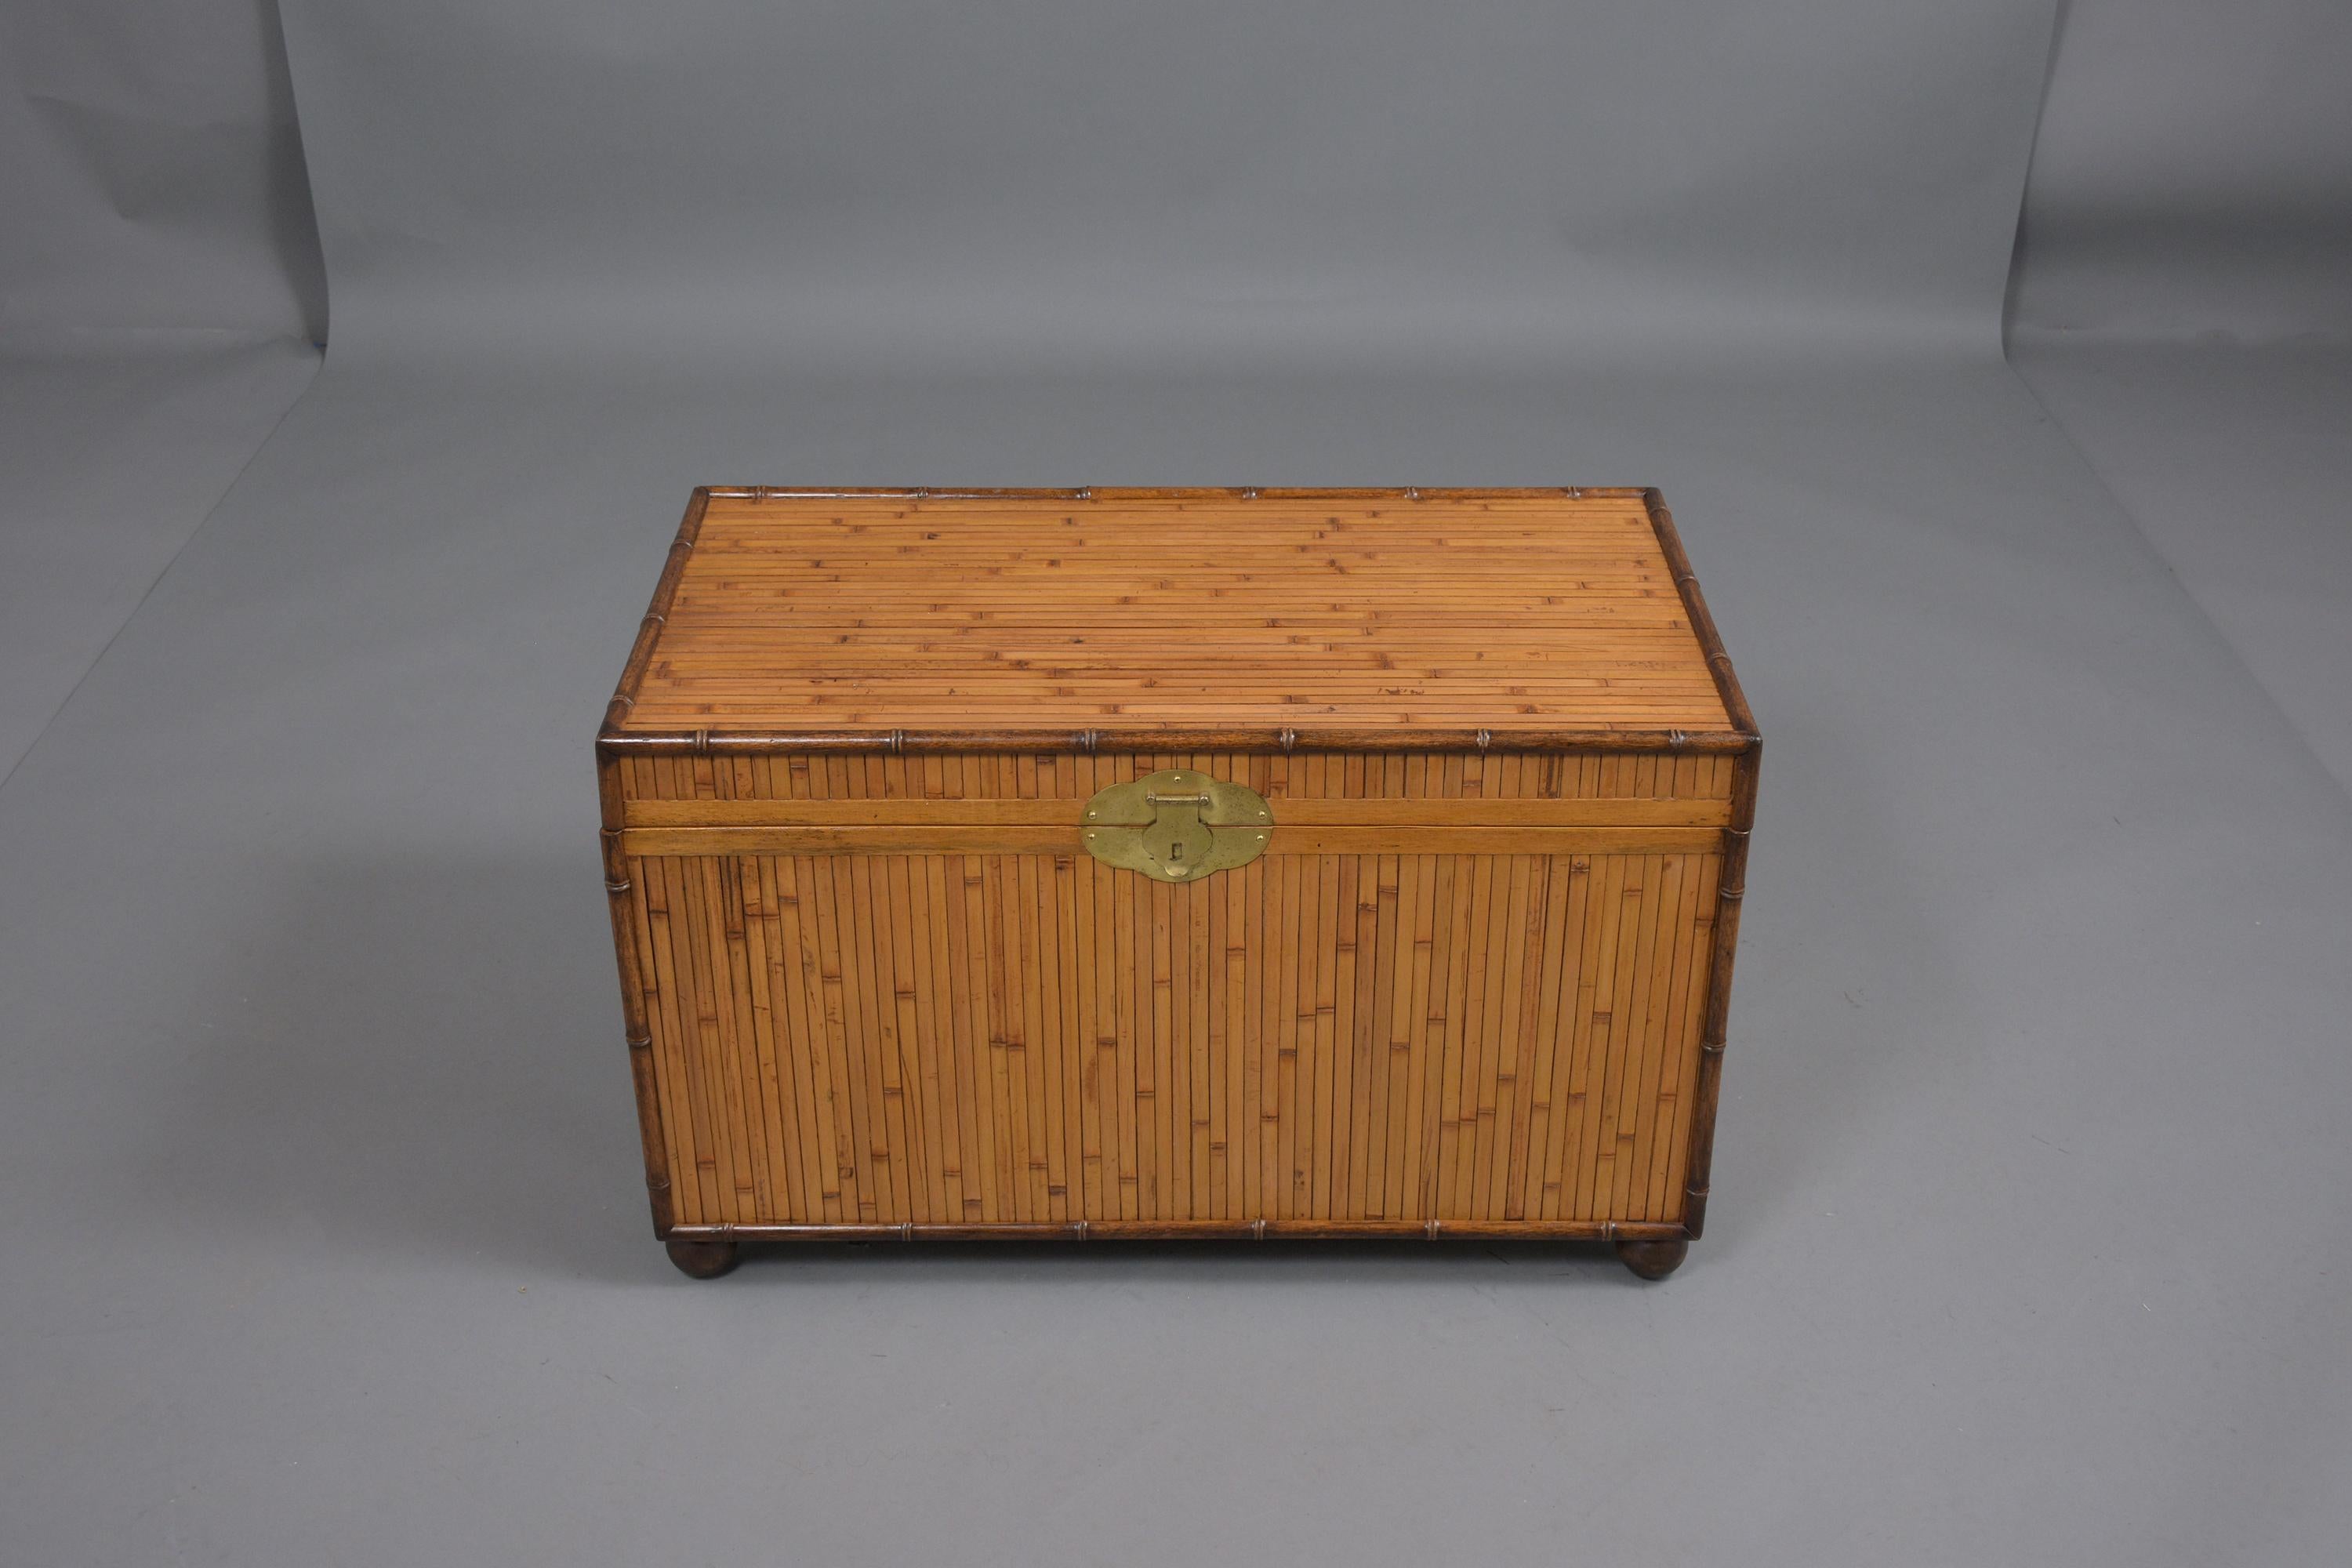 An extraordinary 1980s trunk crafted out of bamboo and wood is in a good condition and covered in bamboo featuring its original golden color and walnut finish. The trunk is newly shellacking, waxed, and polished developing a beautiful patina